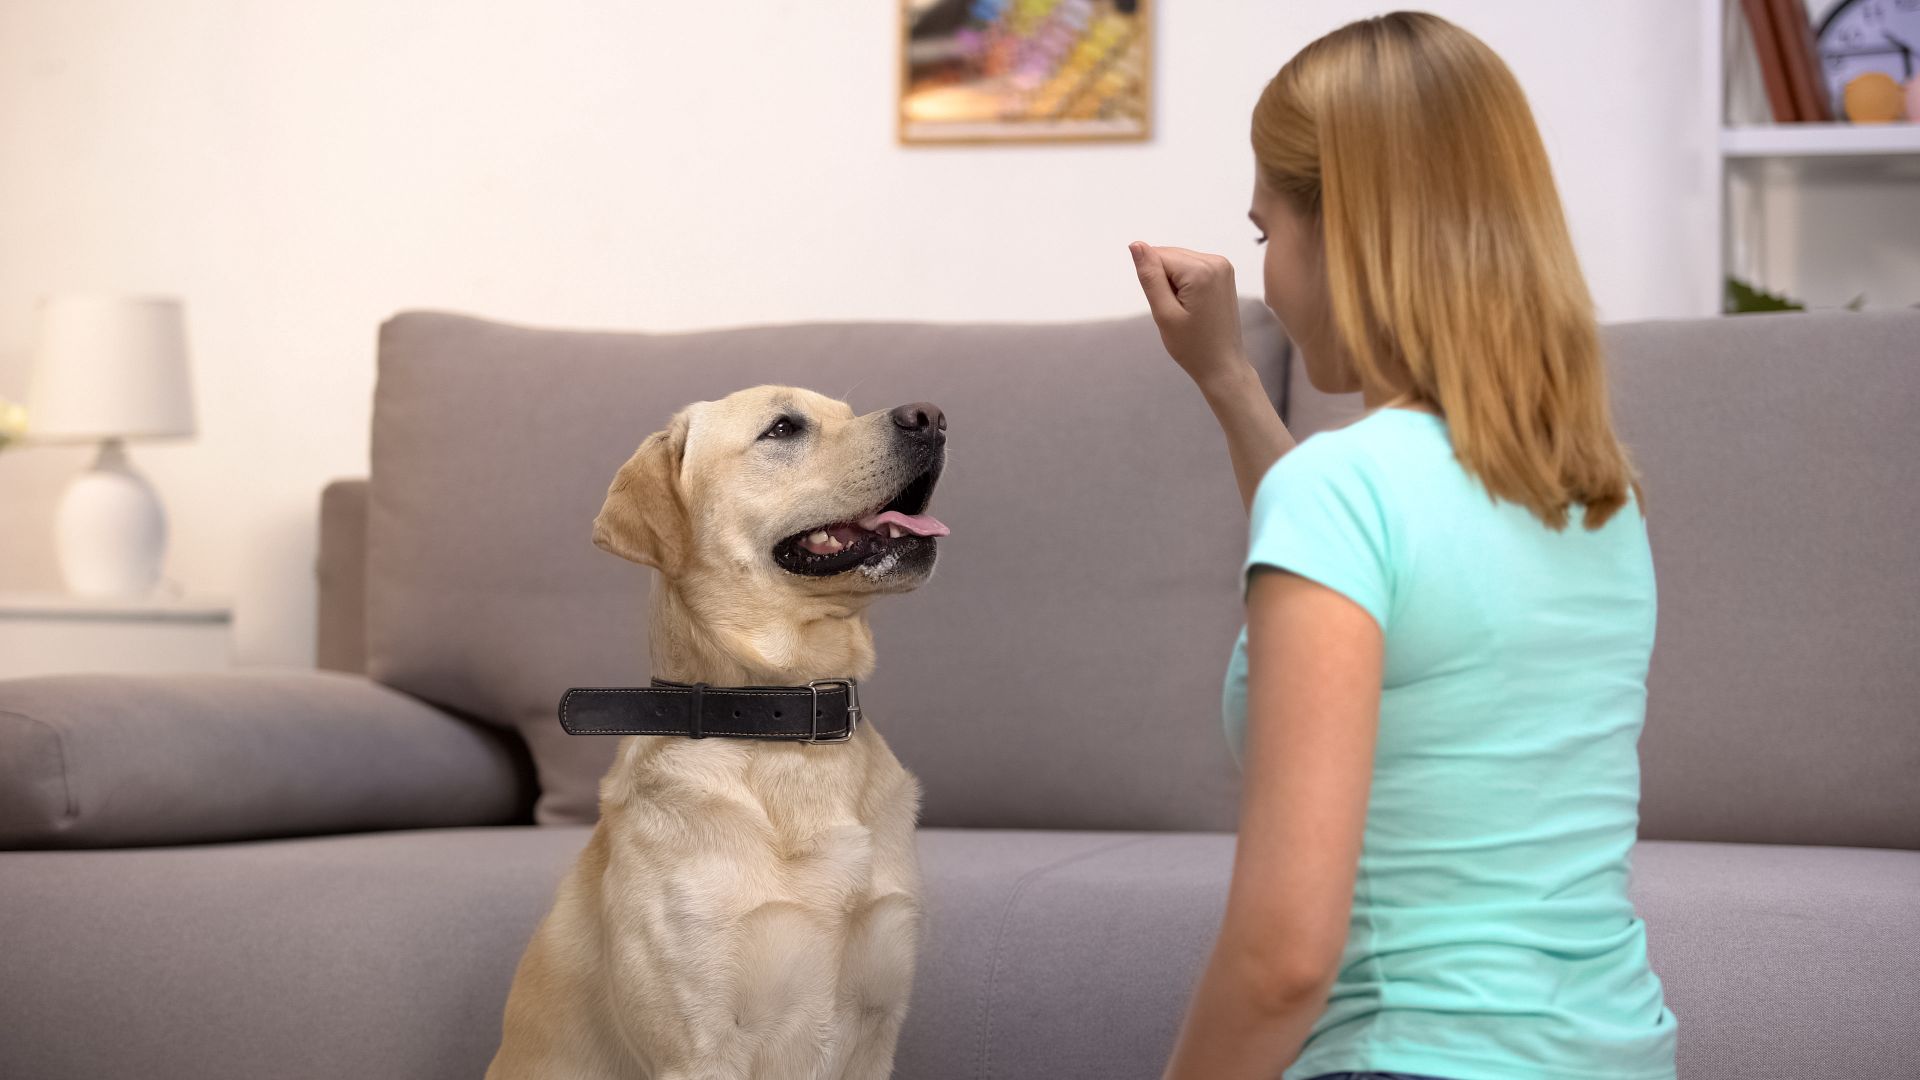 Pet owner dog training their dog at home.